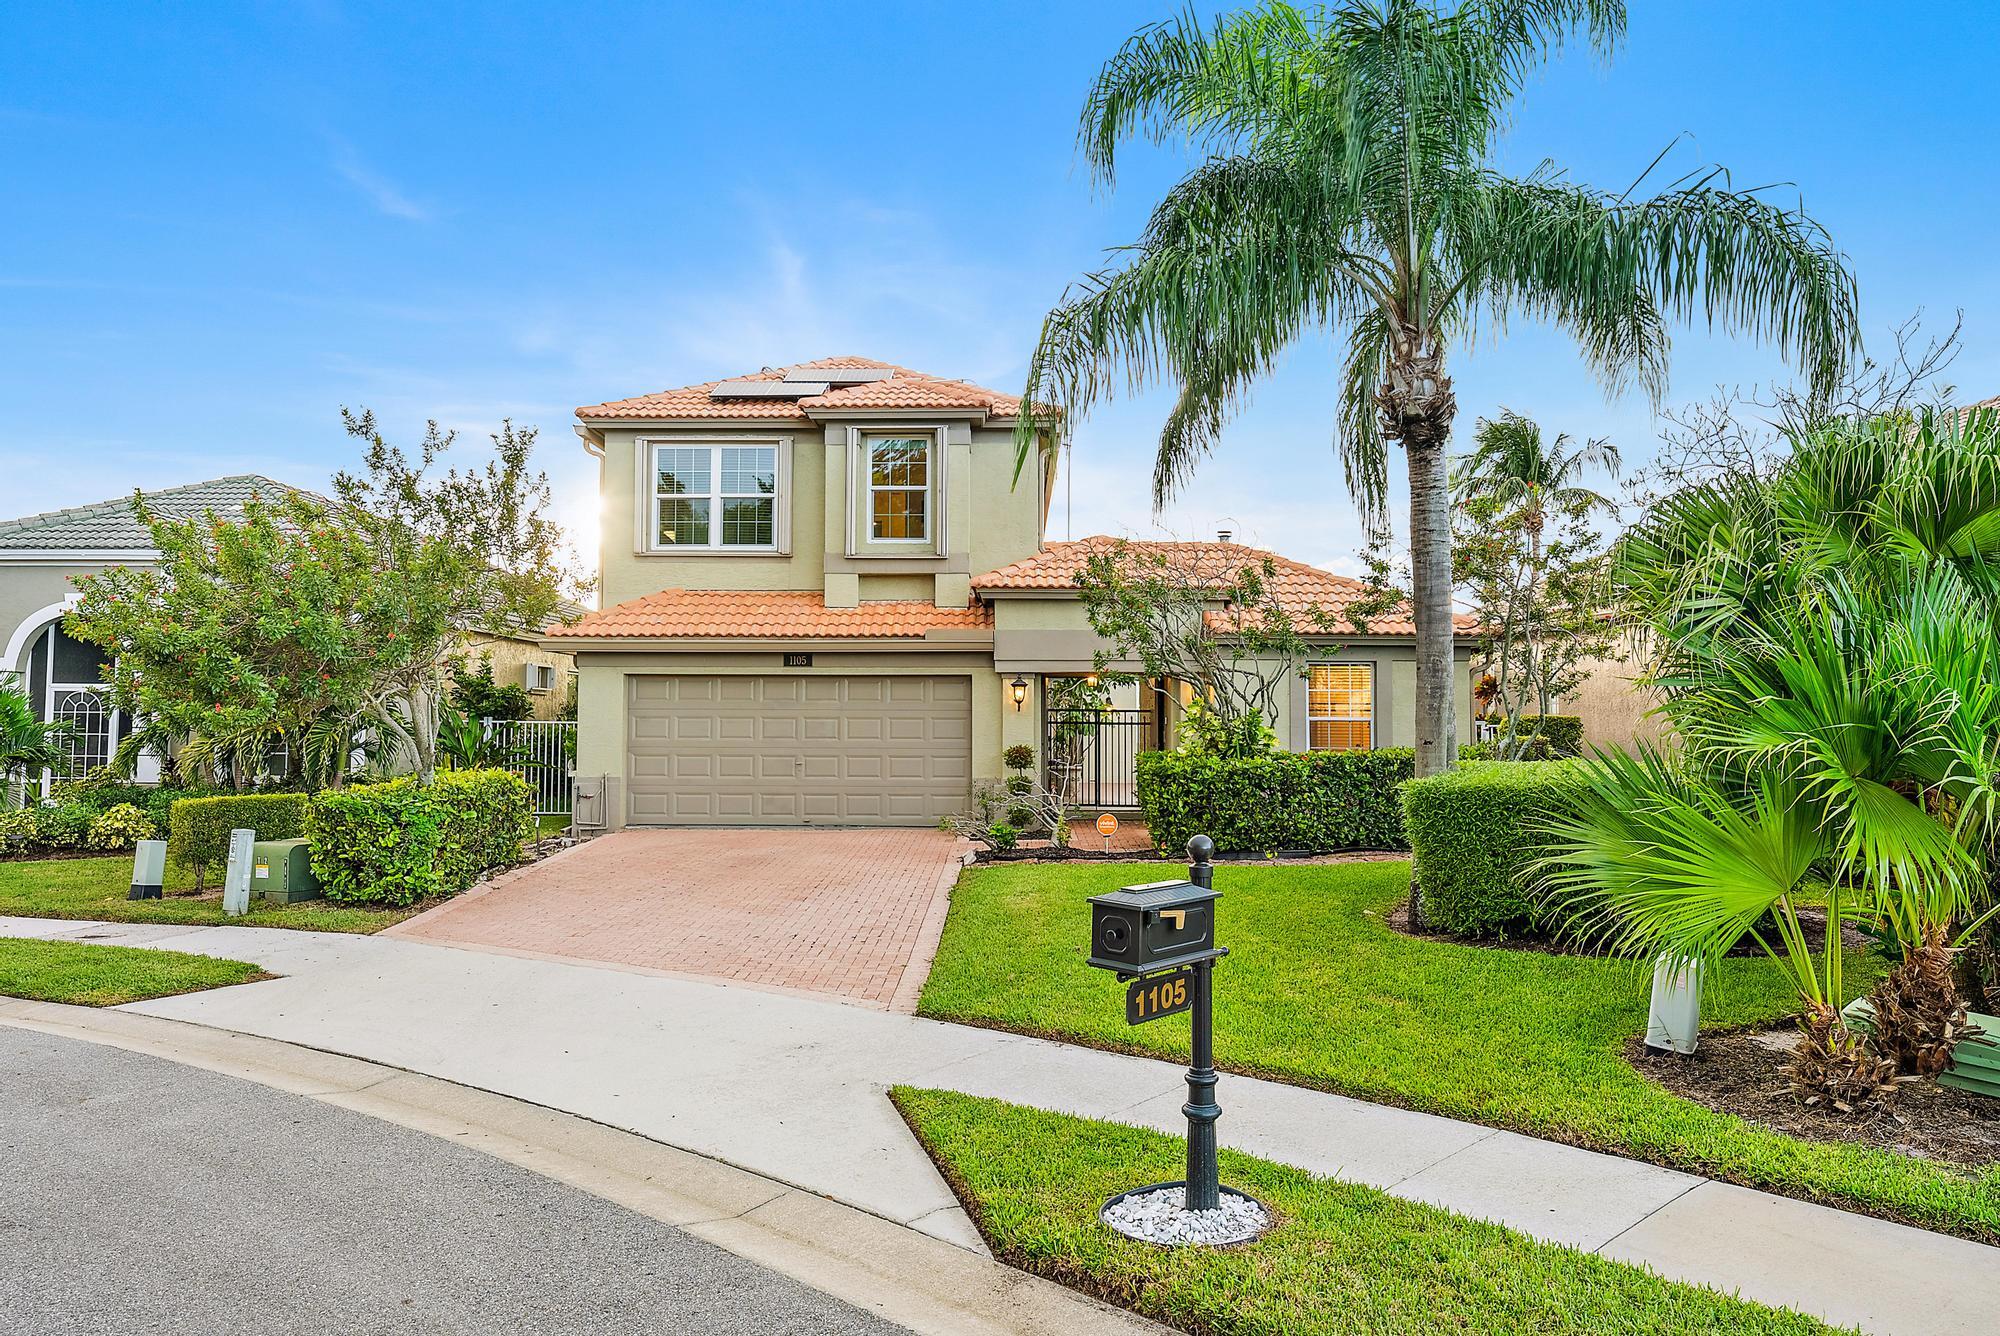 Property for Sale at 1105 Avondale Court, West Palm Beach, Palm Beach County, Florida - Bedrooms: 4 
Bathrooms: 3.5  - $1,079,999